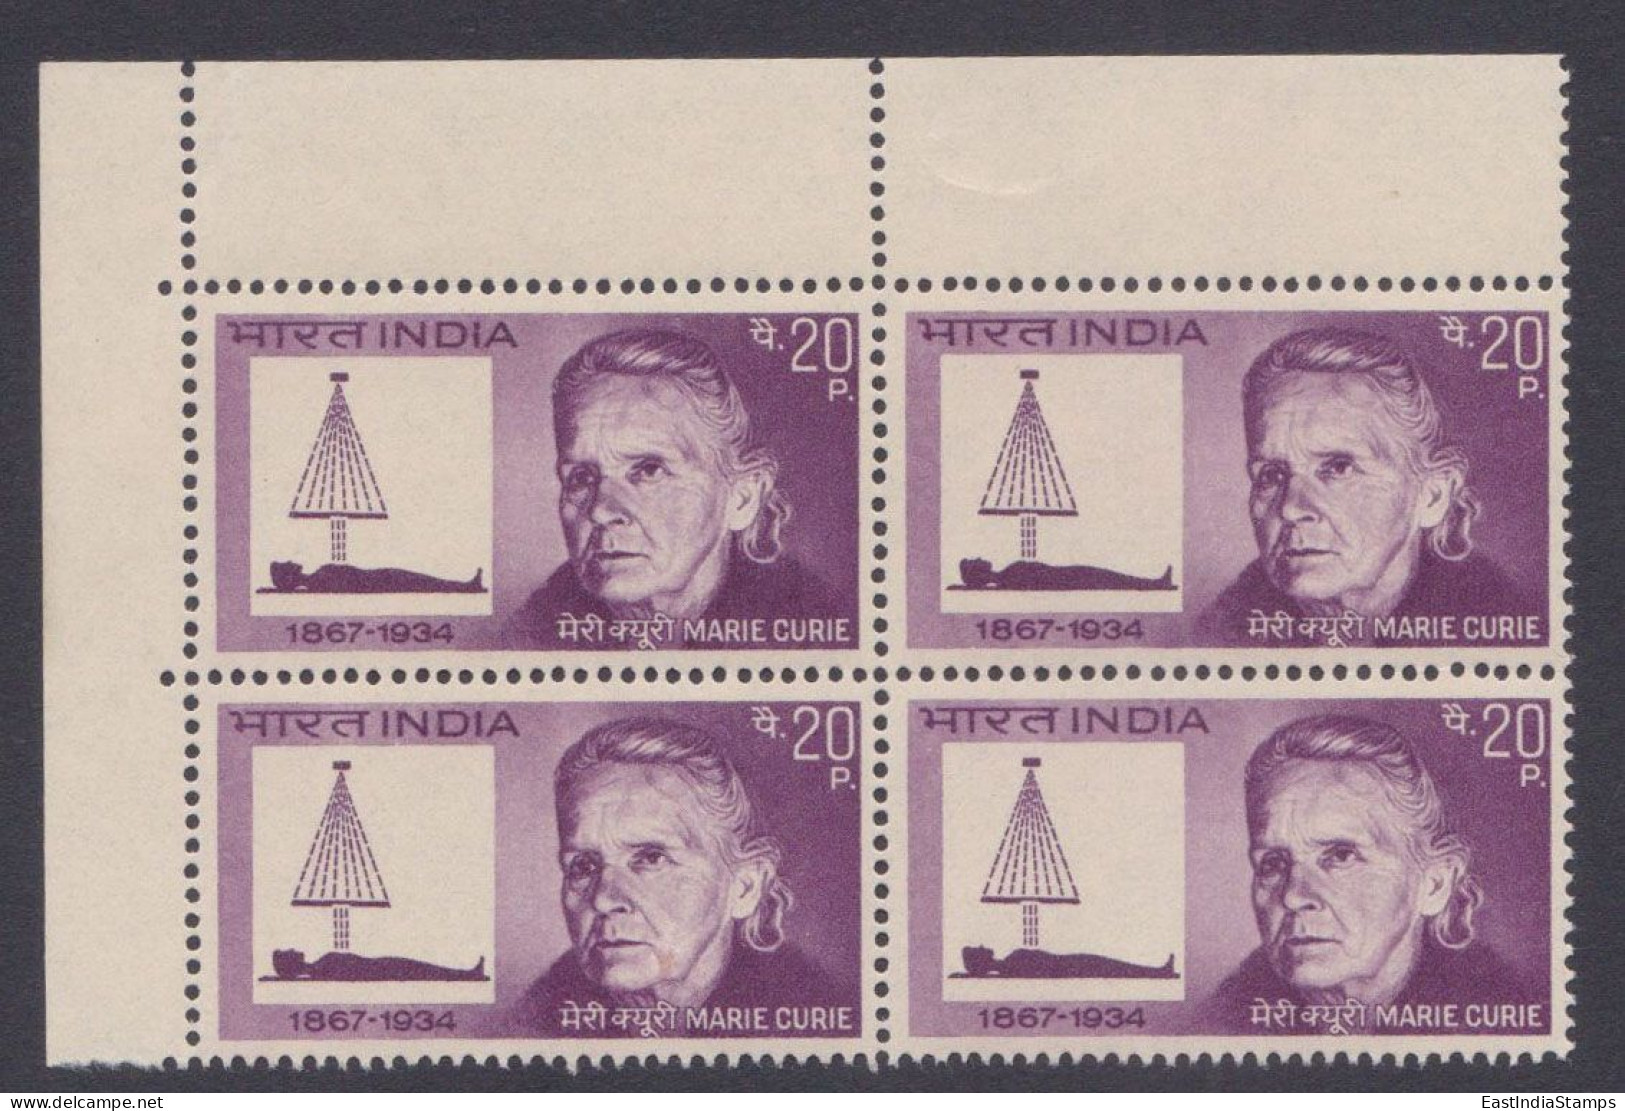 Inde India 1968 MNH Marie Curie, Polish French Chemist, Physicist, Nobel Prize Winner, Science, Scientist, Physics Block - Neufs